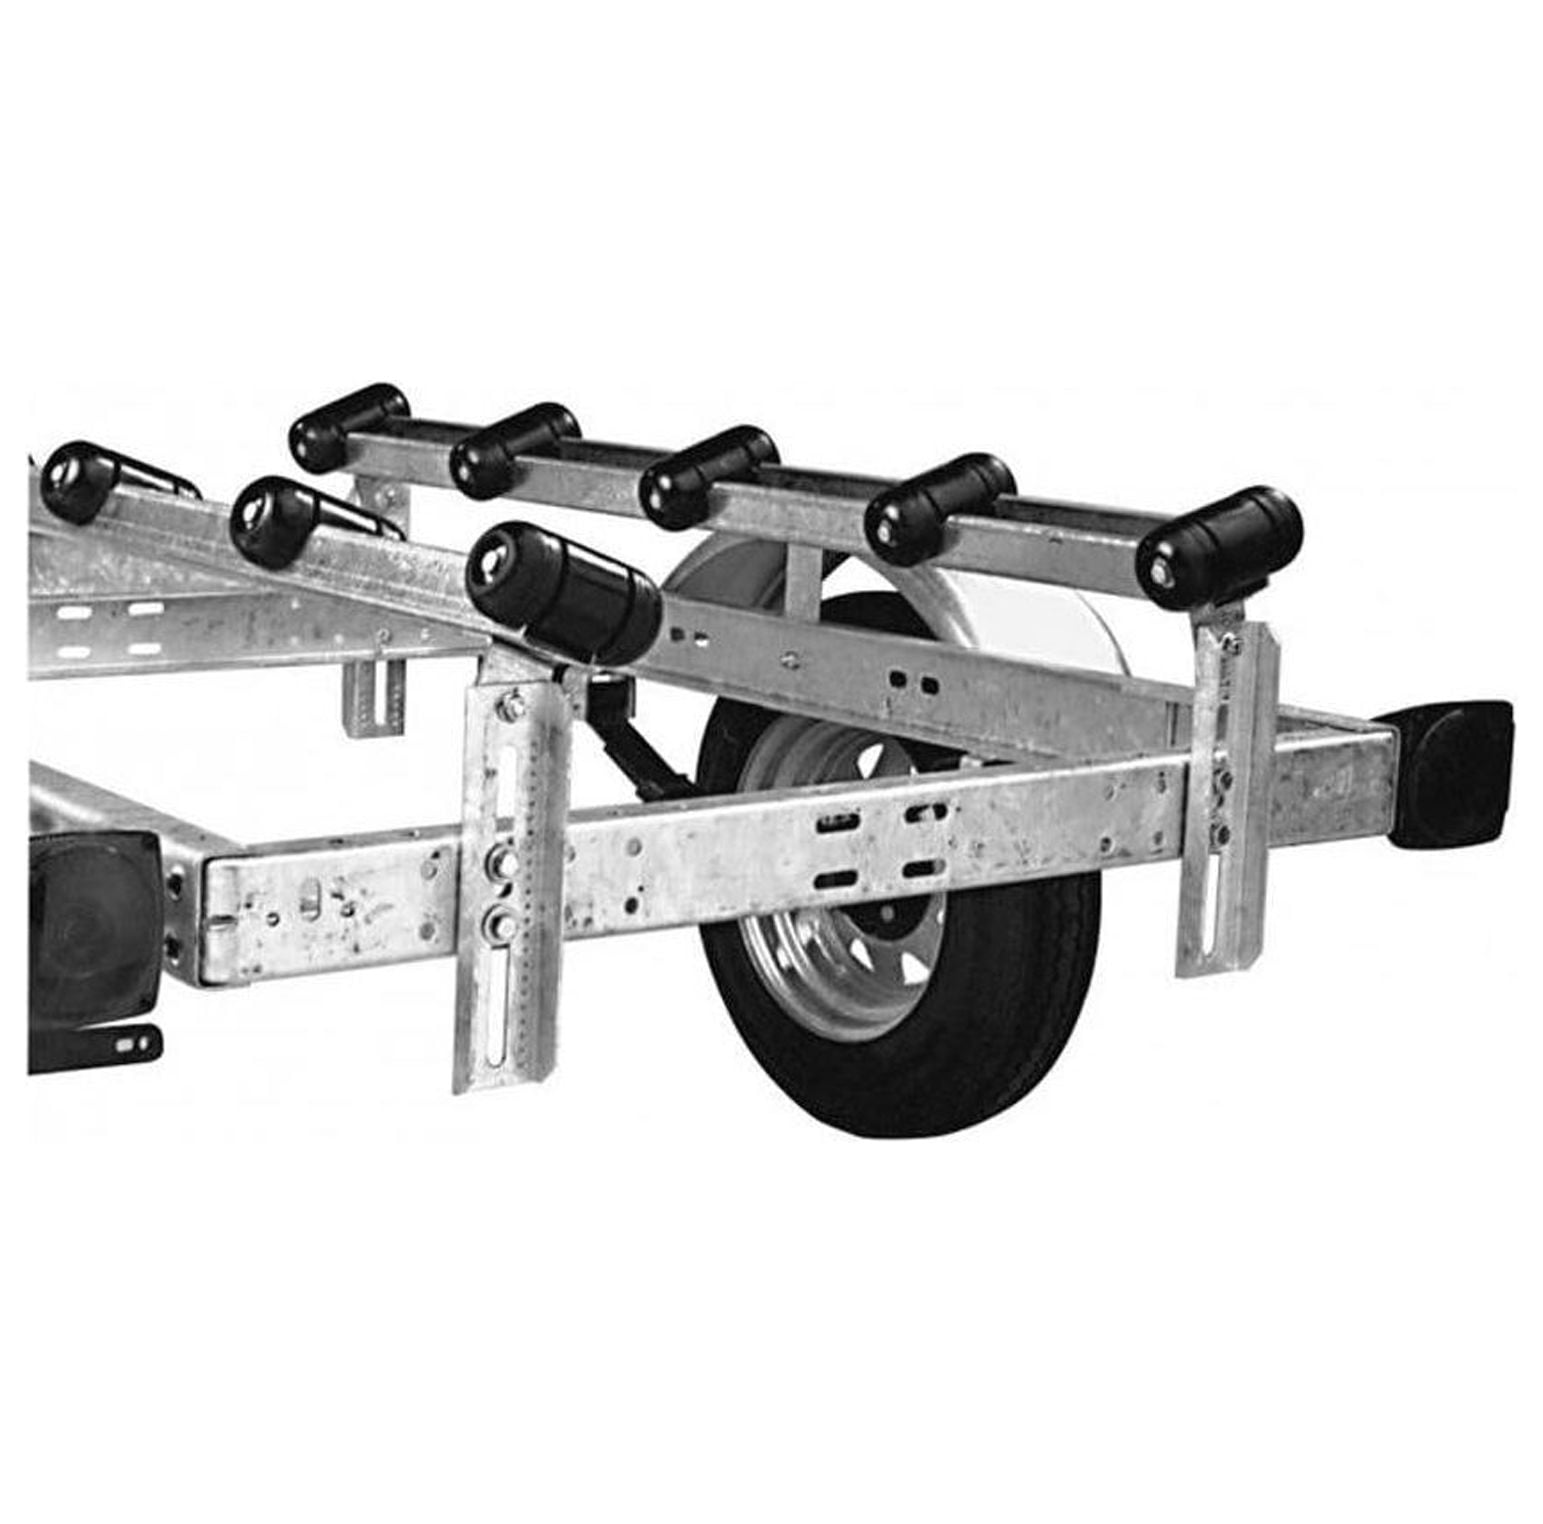 NeosKon Trailer Bunk-Replacement Parts and Accessories for your